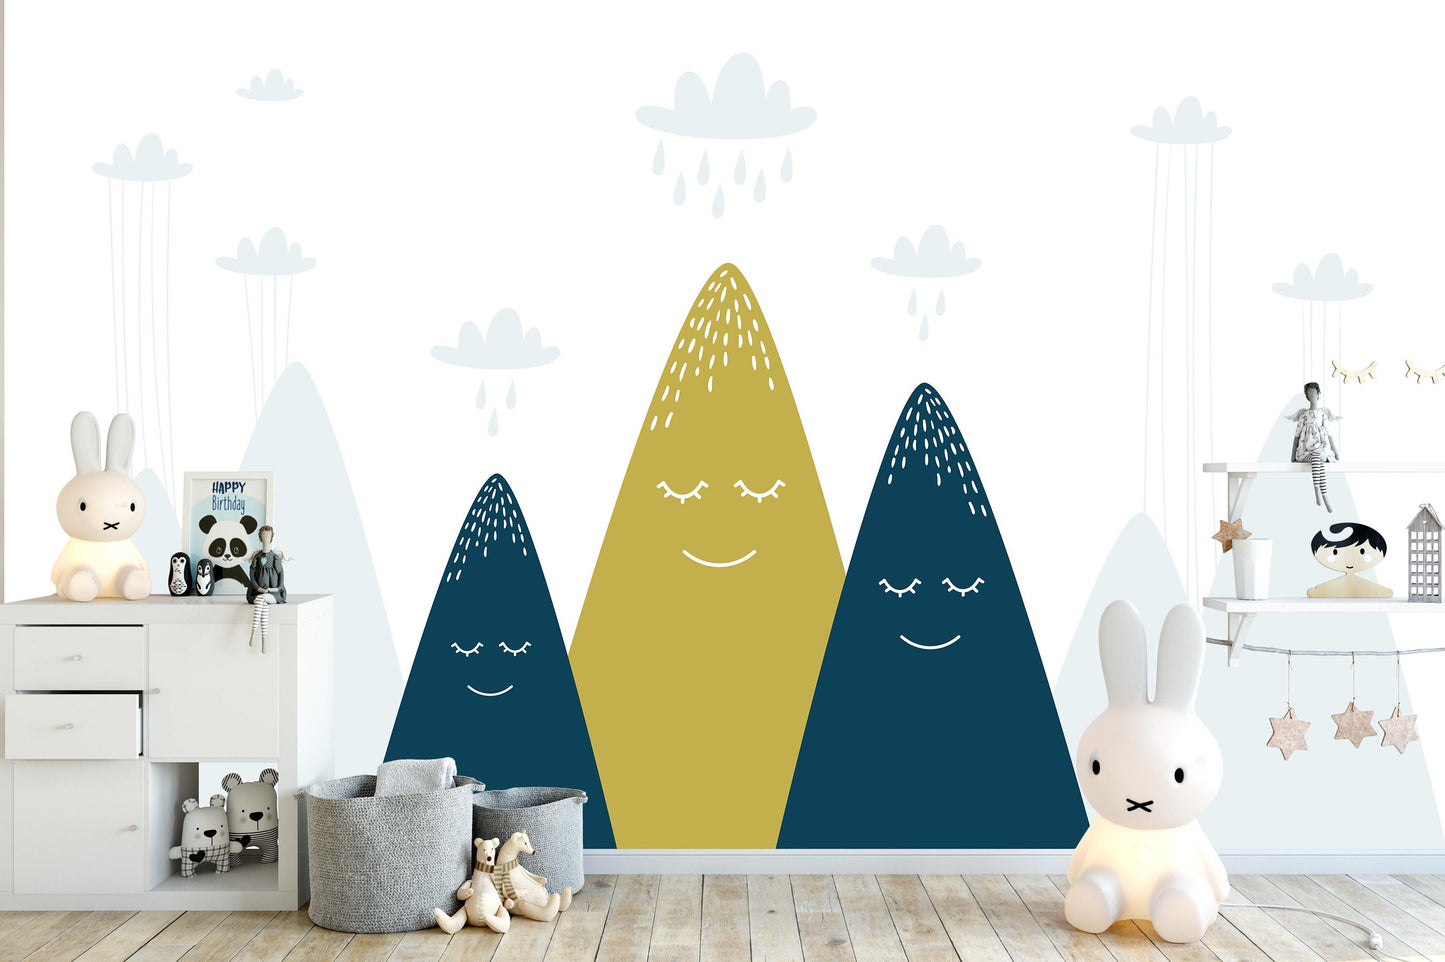 Removable Peel and Stick Wallpaper Smile Mountains Sky Nursery Wall Paper Wall Murals, KL0048